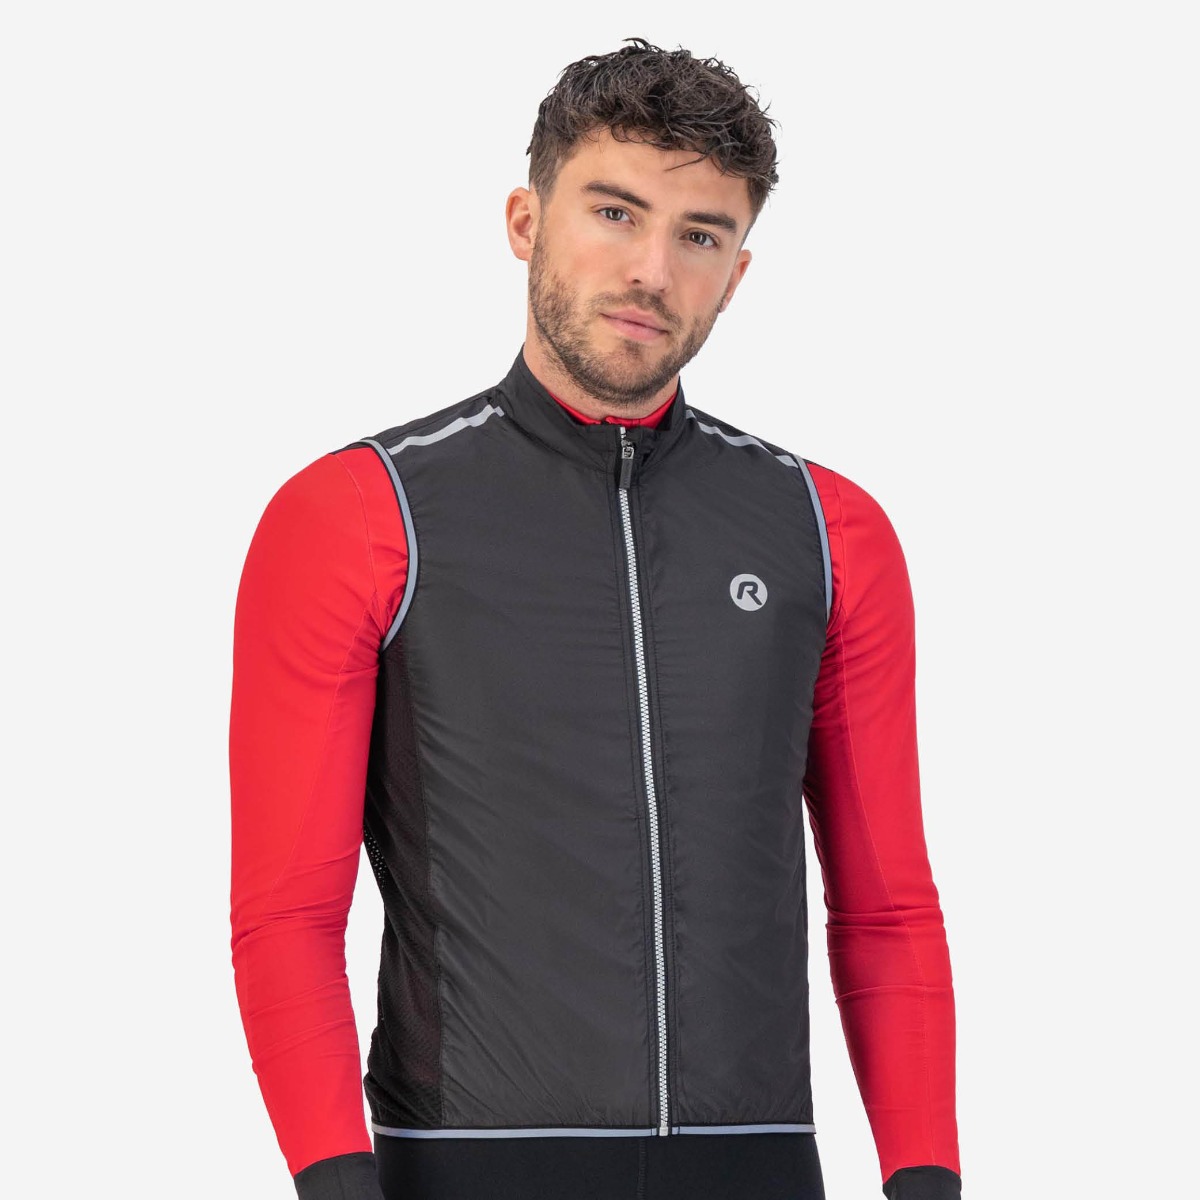 Cyclist is wearing the Rogelli Core body vest, keeping the body warm despite the cold wind